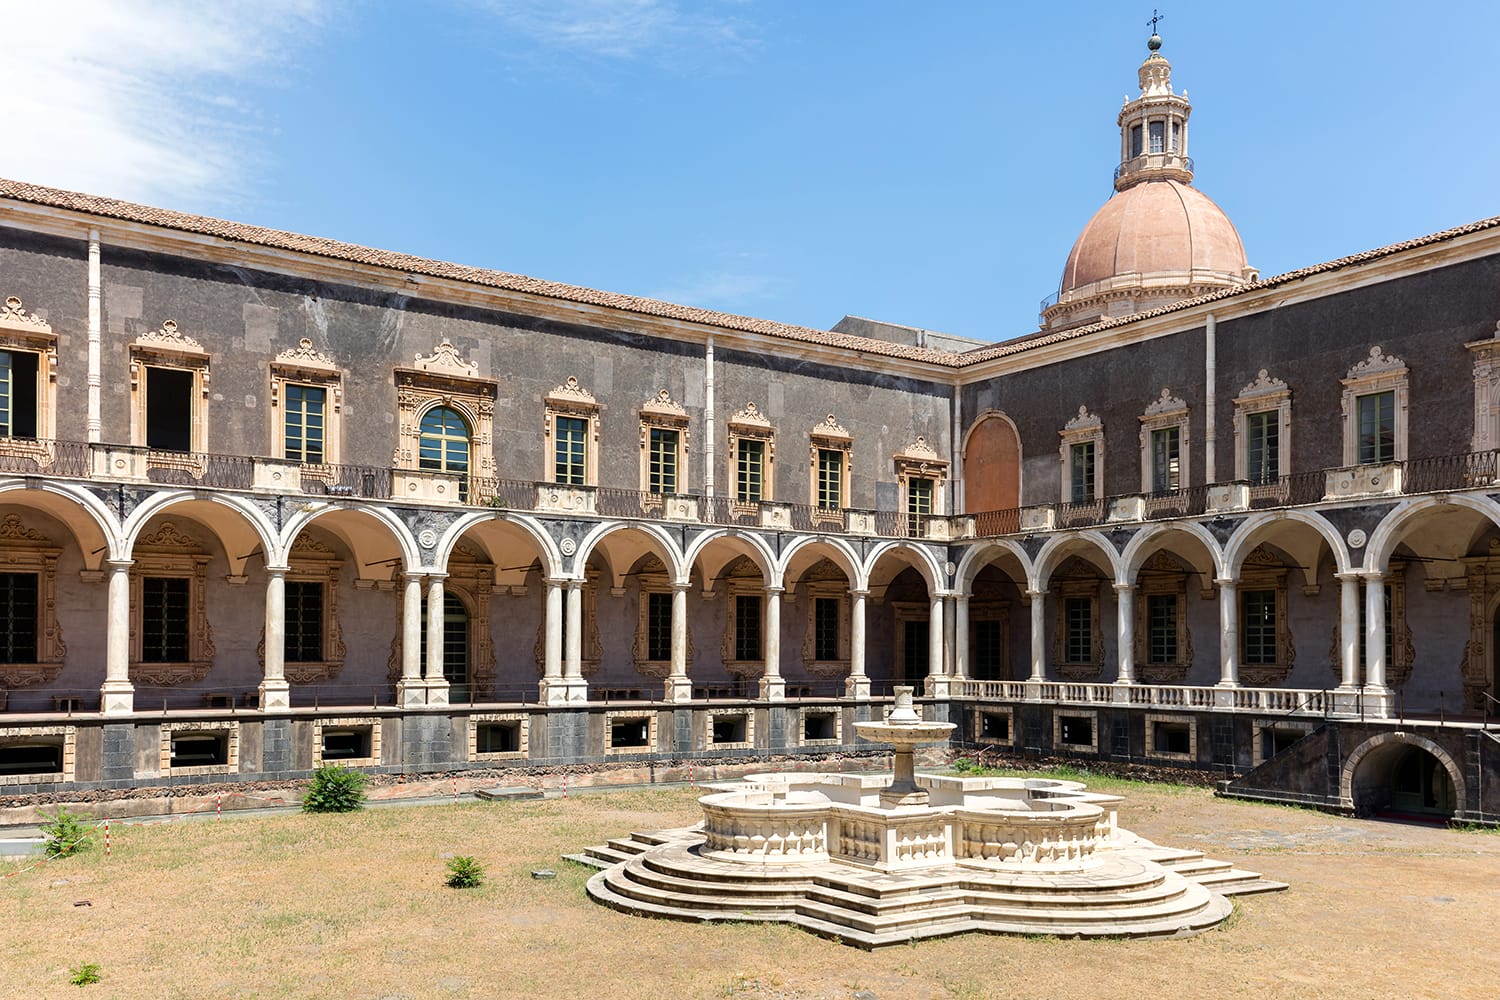 Cloister of the Benedictine Monastery of San Nicolo l'Arena in Catania, Sicily, Italy, a jewel of the late Sicilian Baroque style.